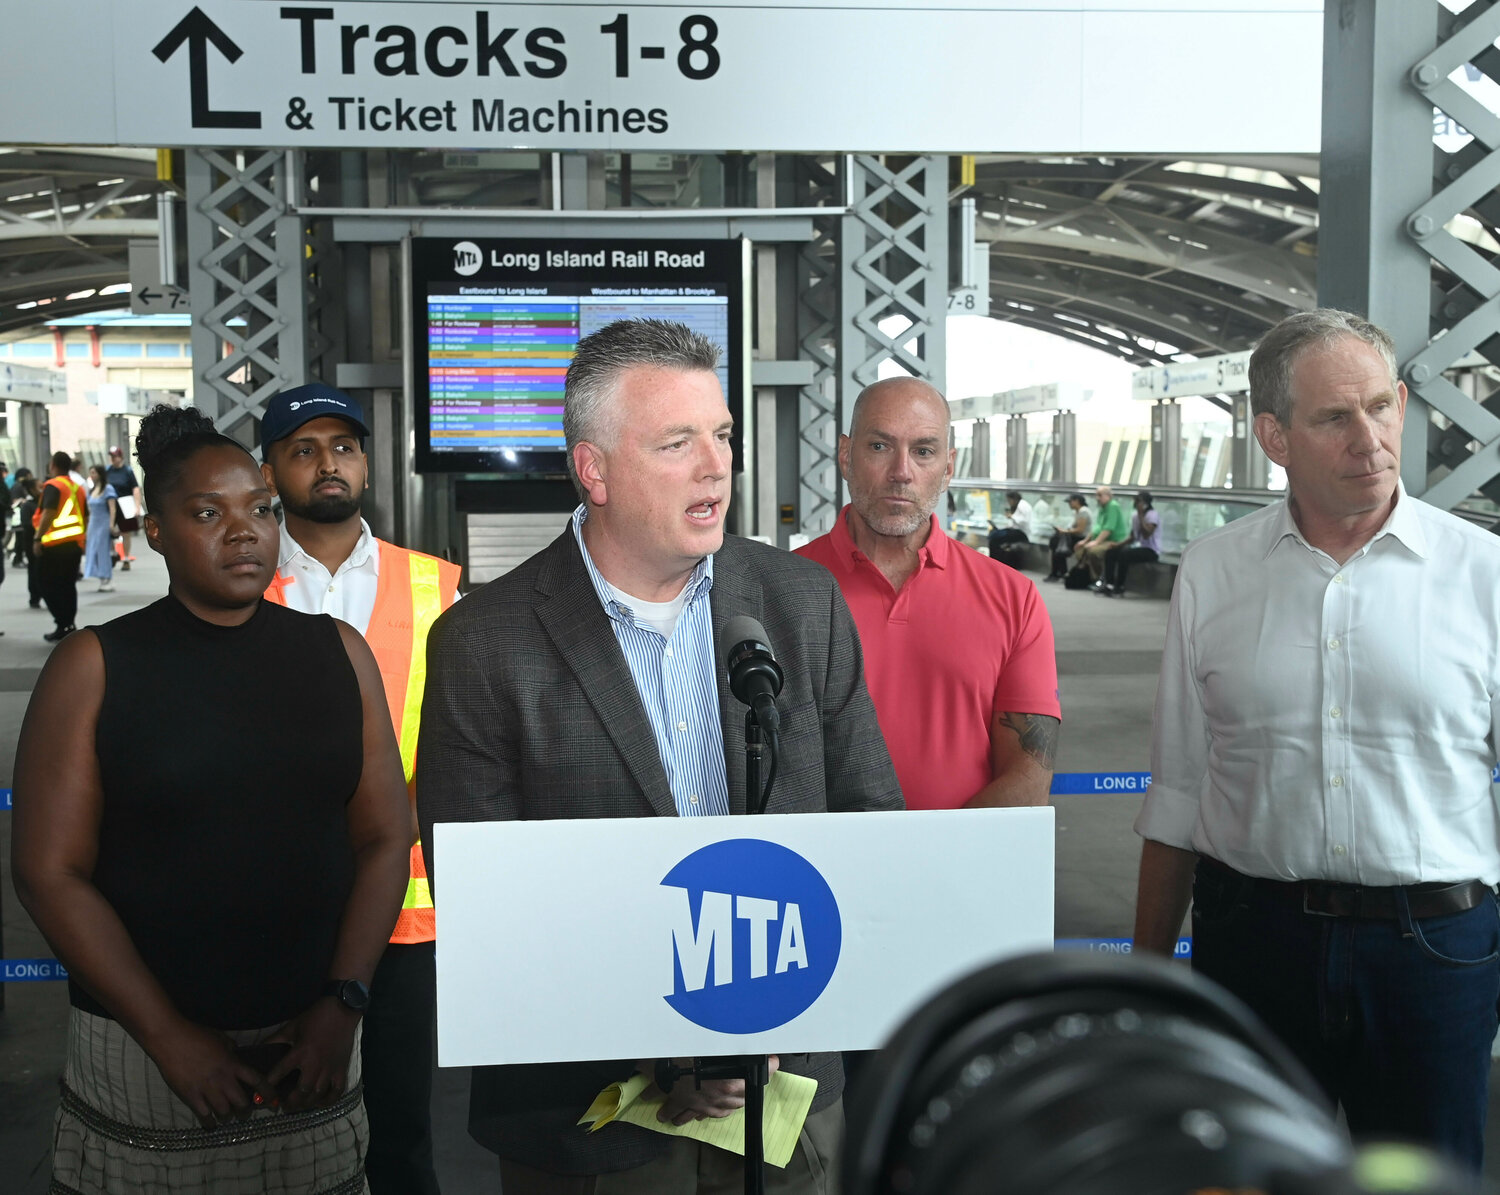 Robert Free, who rose the ranks to become the Metropolitan Transportation Authority’s vice president of operations, was named the Long Island Rail Road’s acting president late last month.